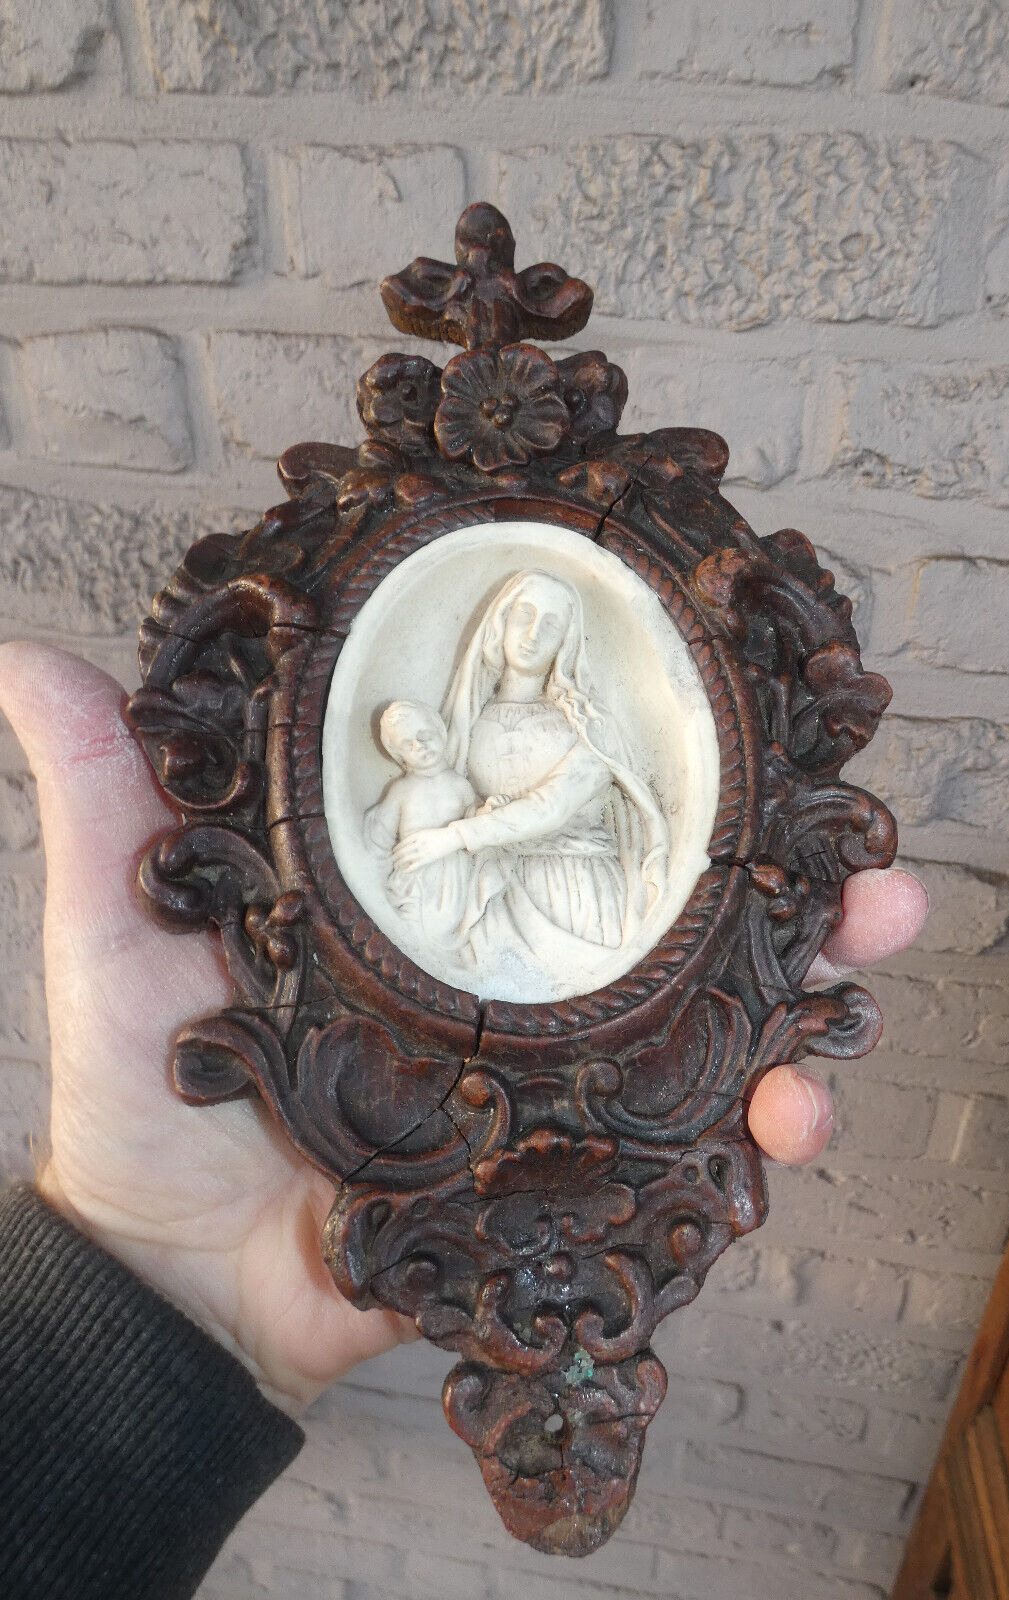 Antique French wood chalk madonna child relief wall plaque religious